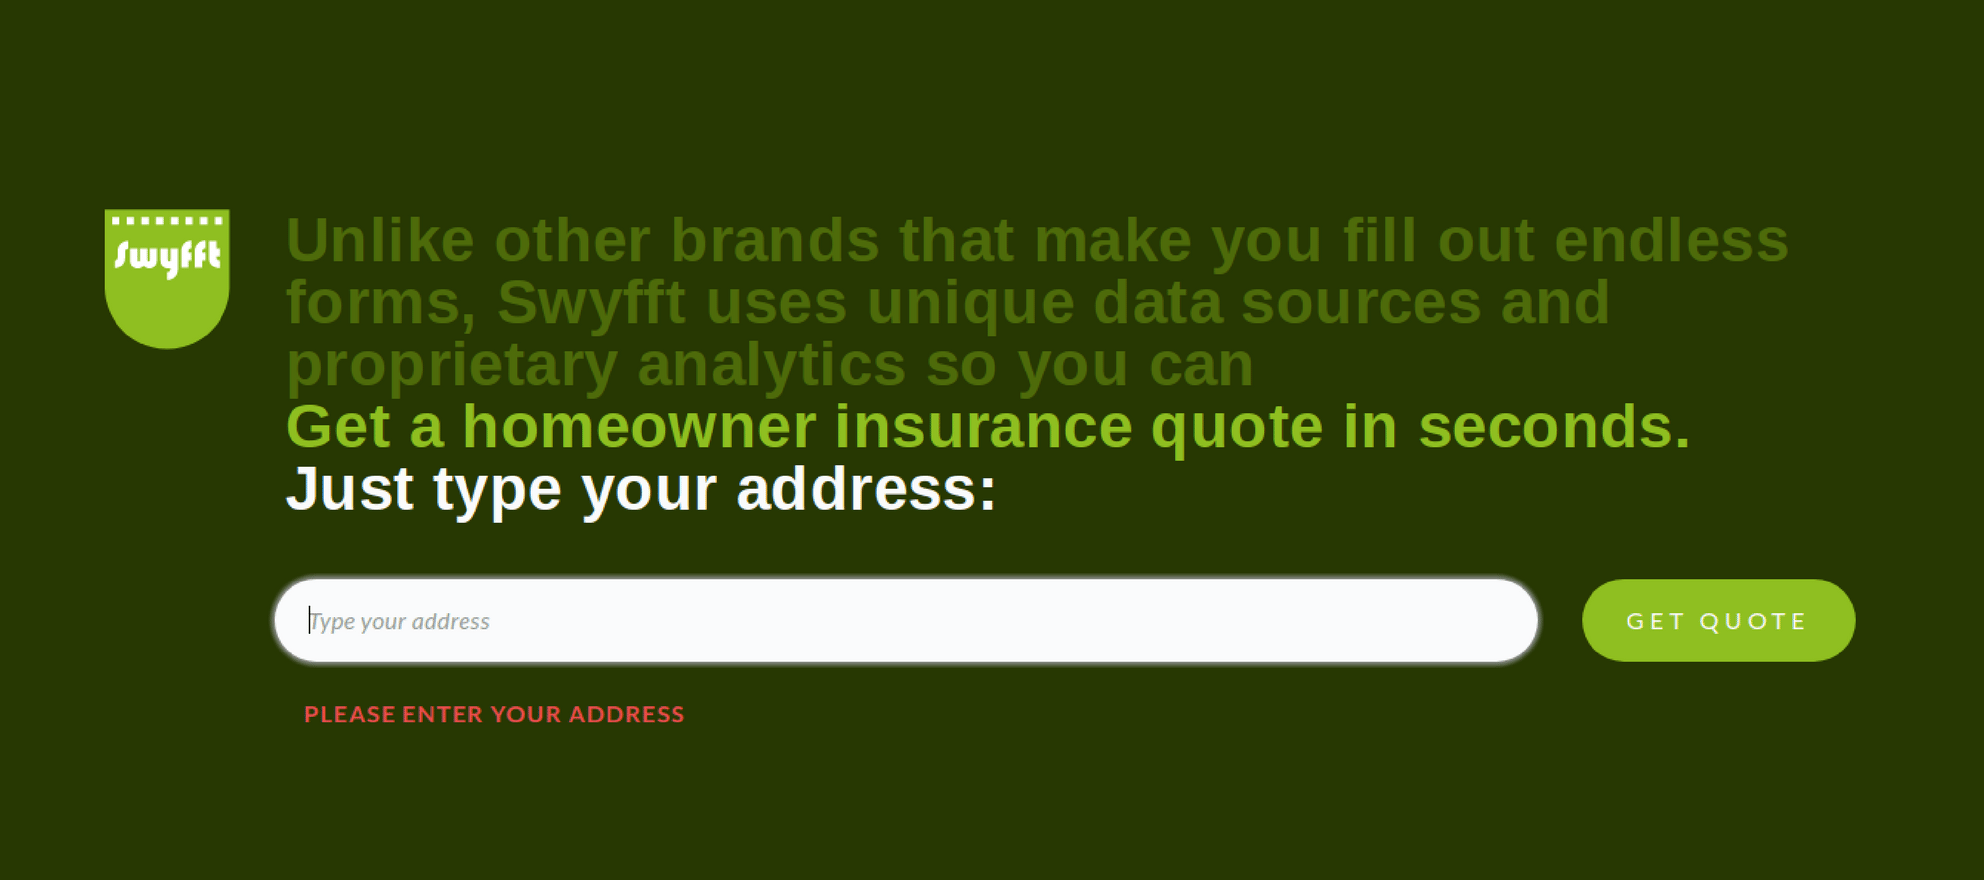 Software generates binding home insurance quotes in seconds